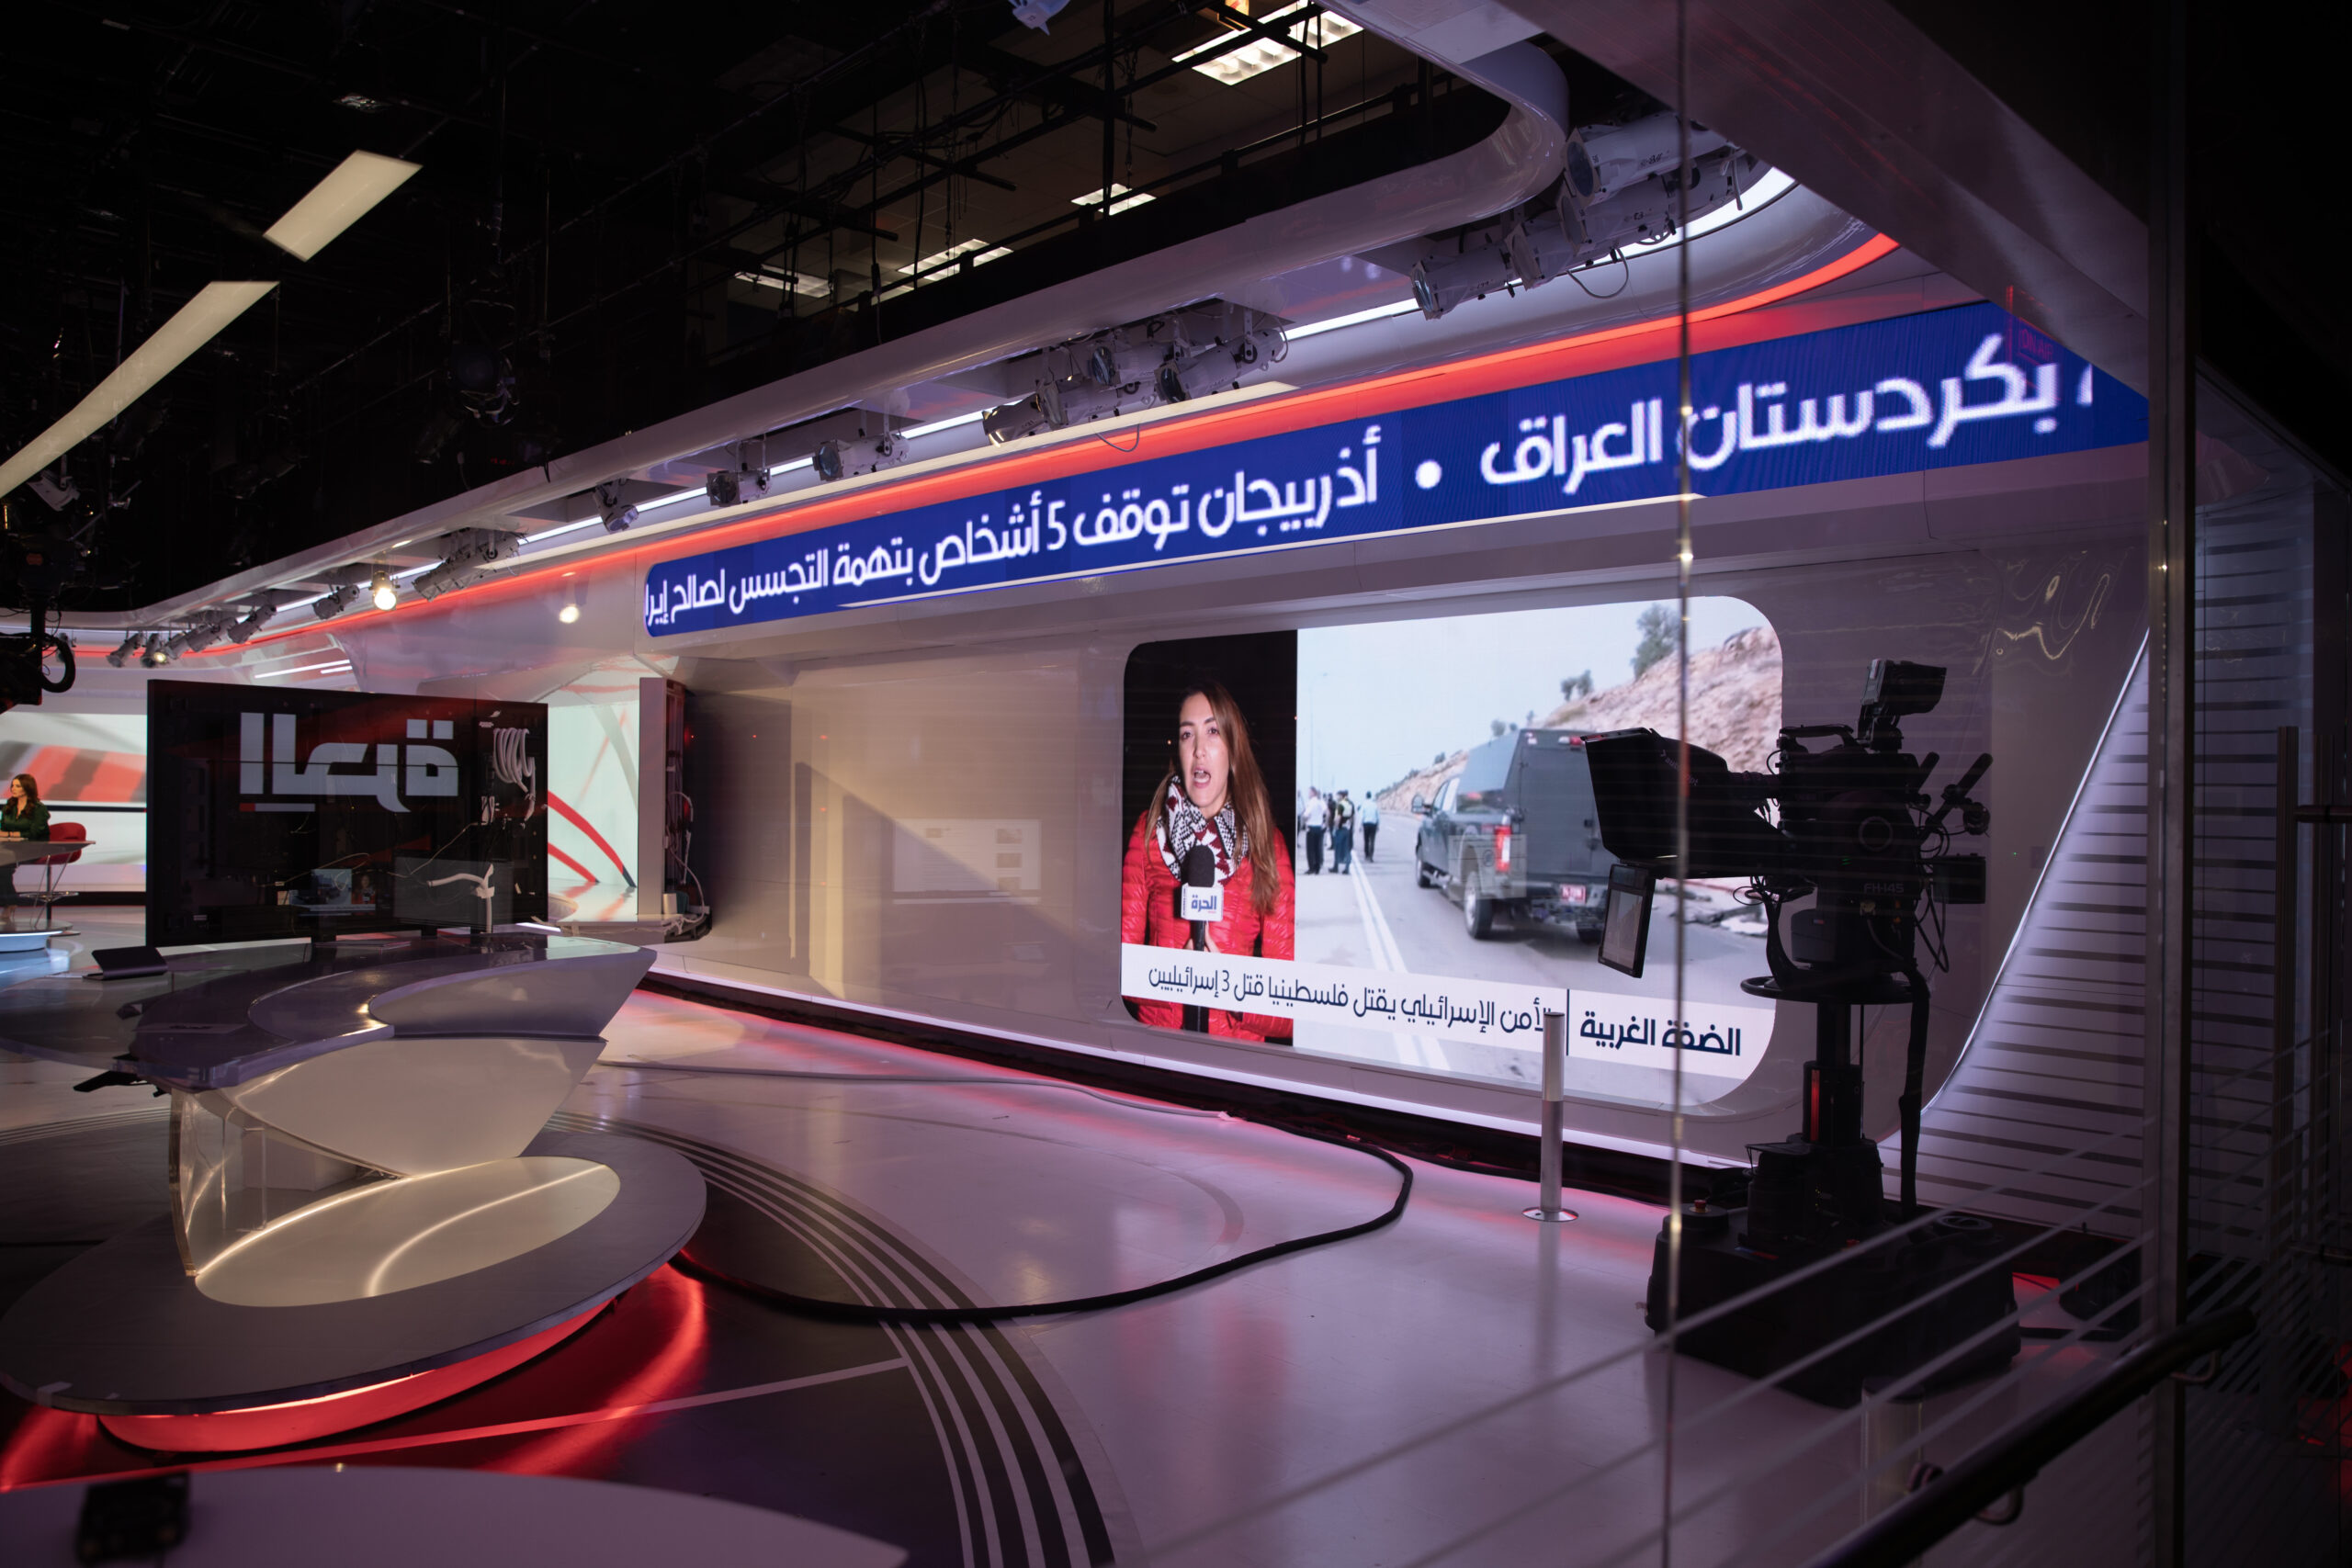 On a mission to counter media bias for the MENA region